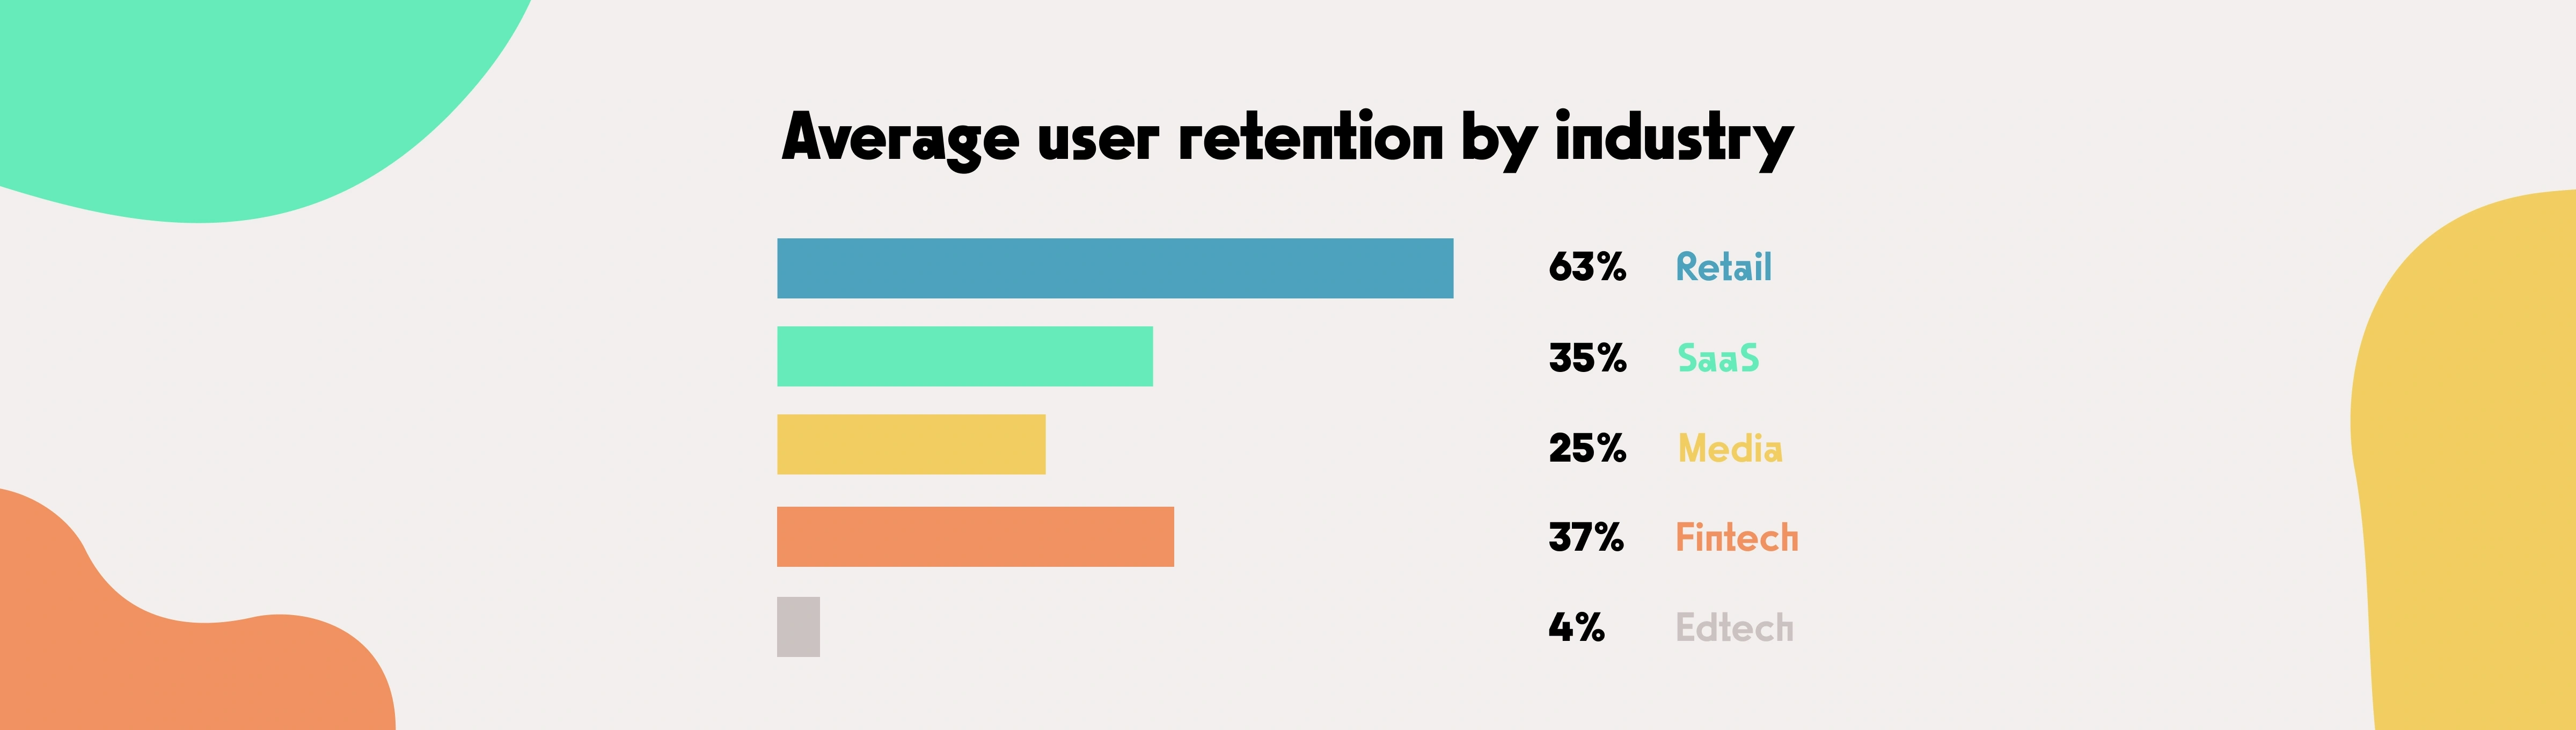 A statistics of average user retention by industries: retail, SaaS, fintech and edutech